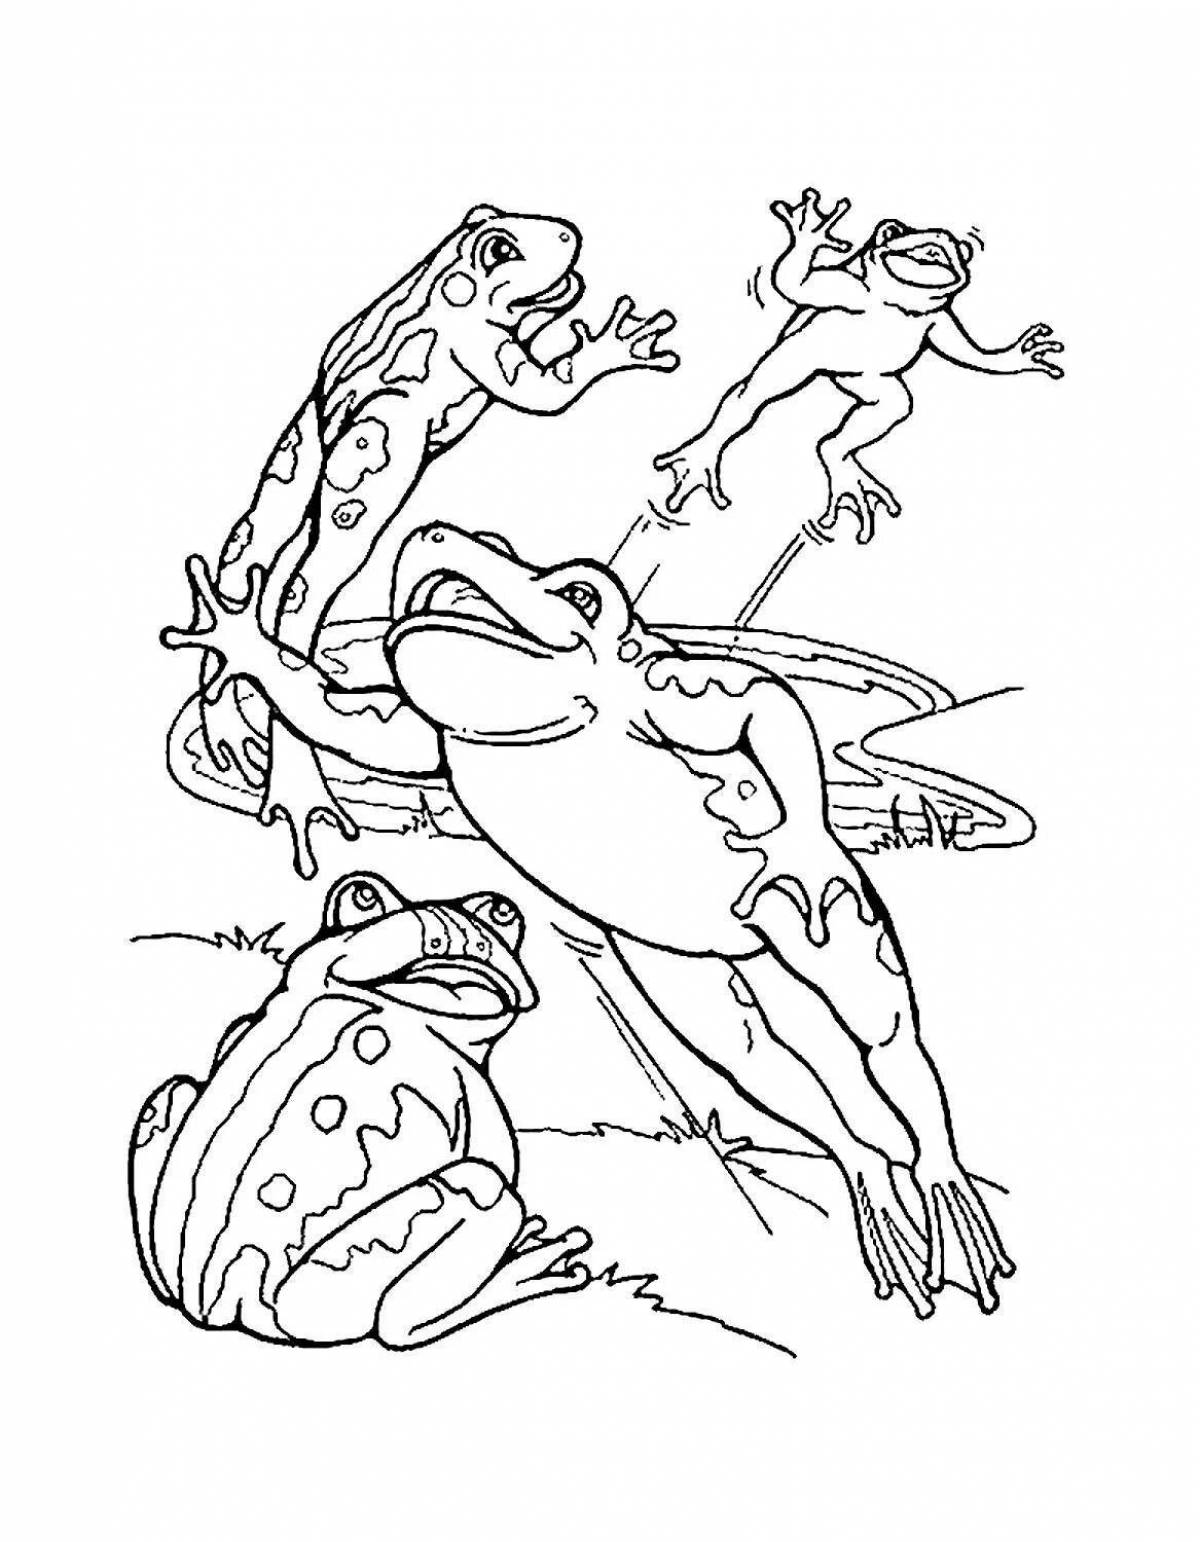 Colourful travel frog coloring page